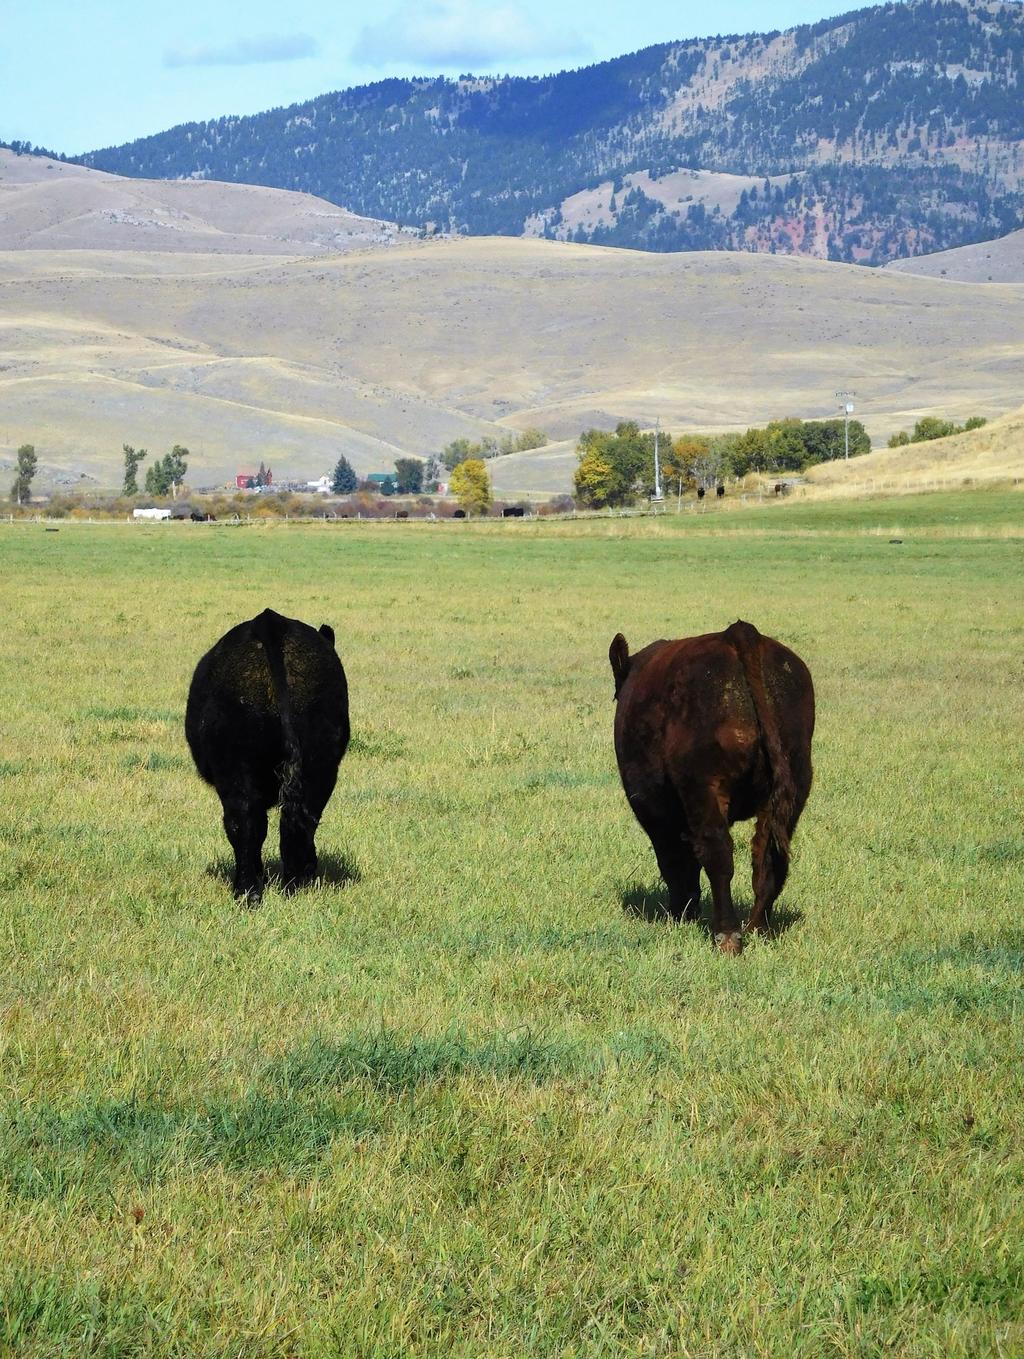 November 2017 Dear Cattlemen, Maternal Power Bull Sale December 5th thru 13th, 2017 At the Ranch - Drummond, Mt 1516E Our family here at Parke Ranch would like to welcome you to our second silent